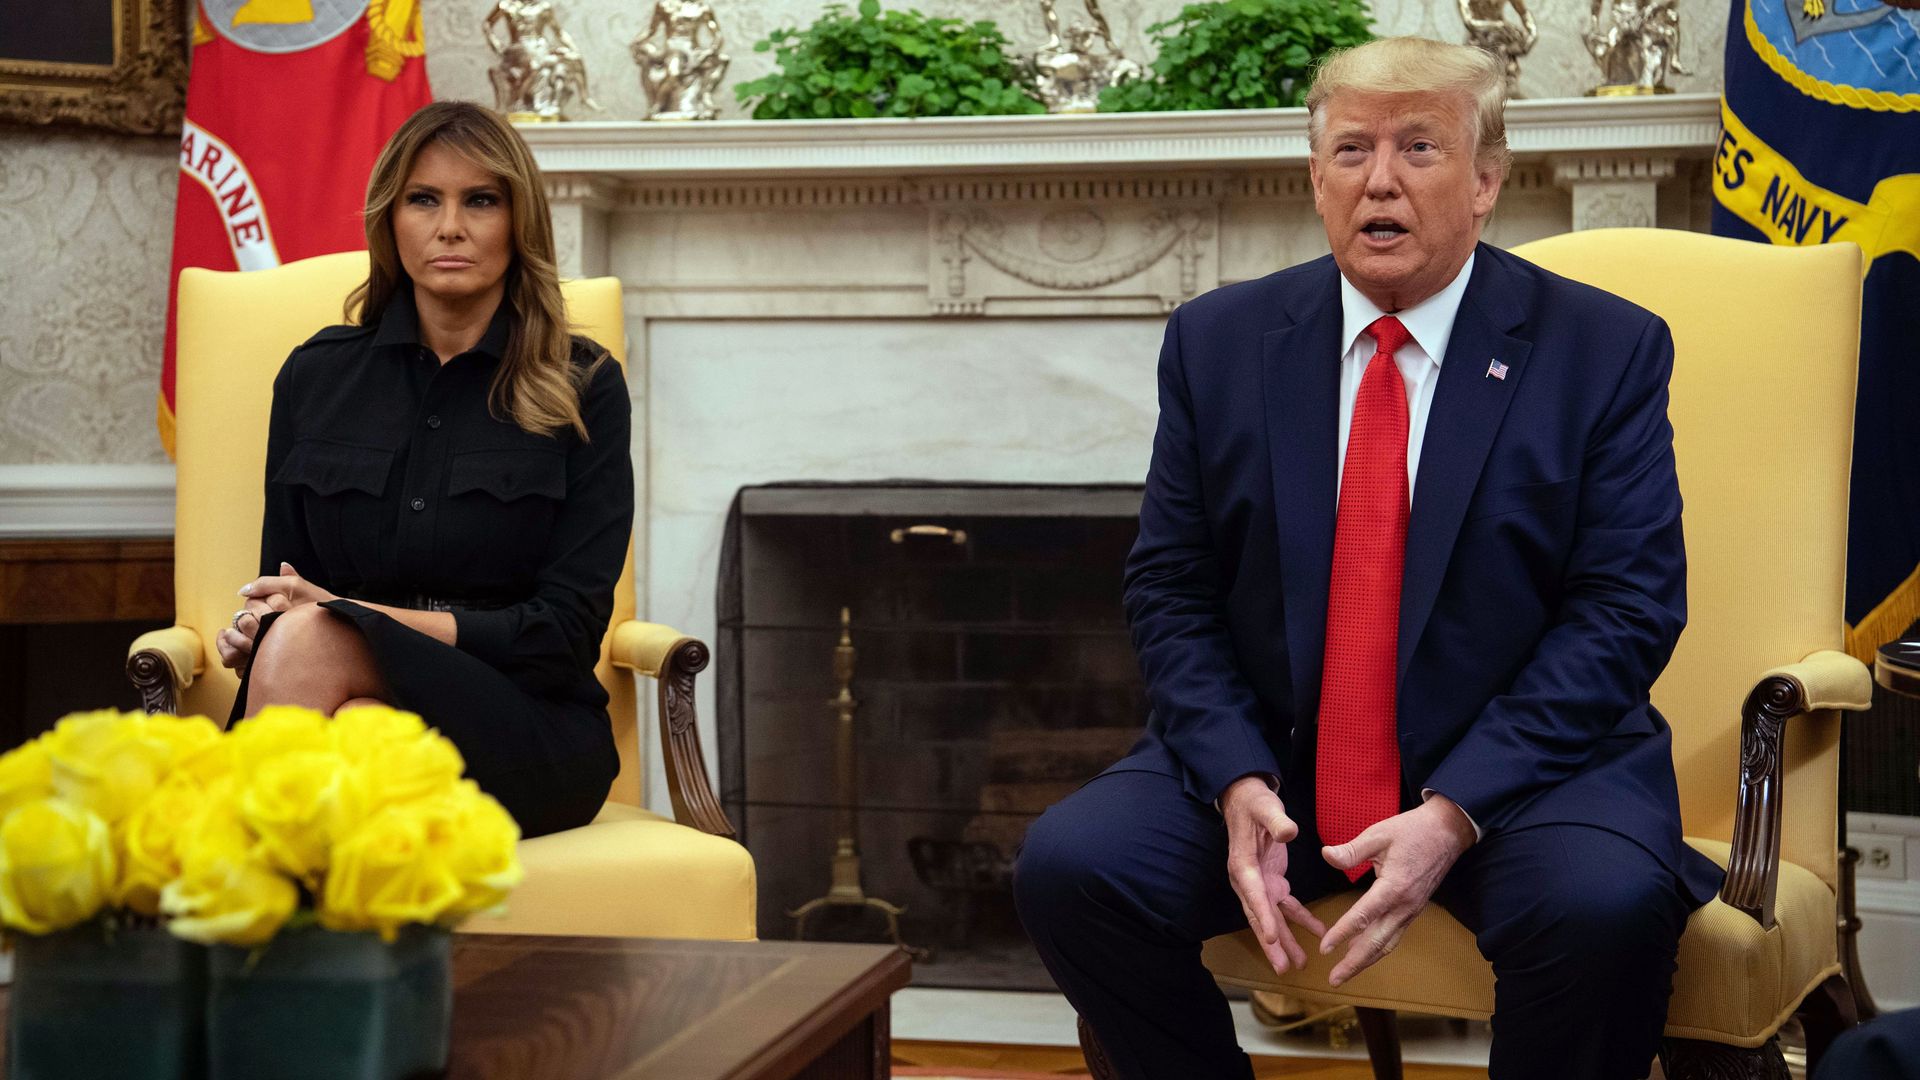 President Donald Trump, with First Lady Melania Trump, speaks to the press in the Oval Office at the White House in Washington, DC, on September 11